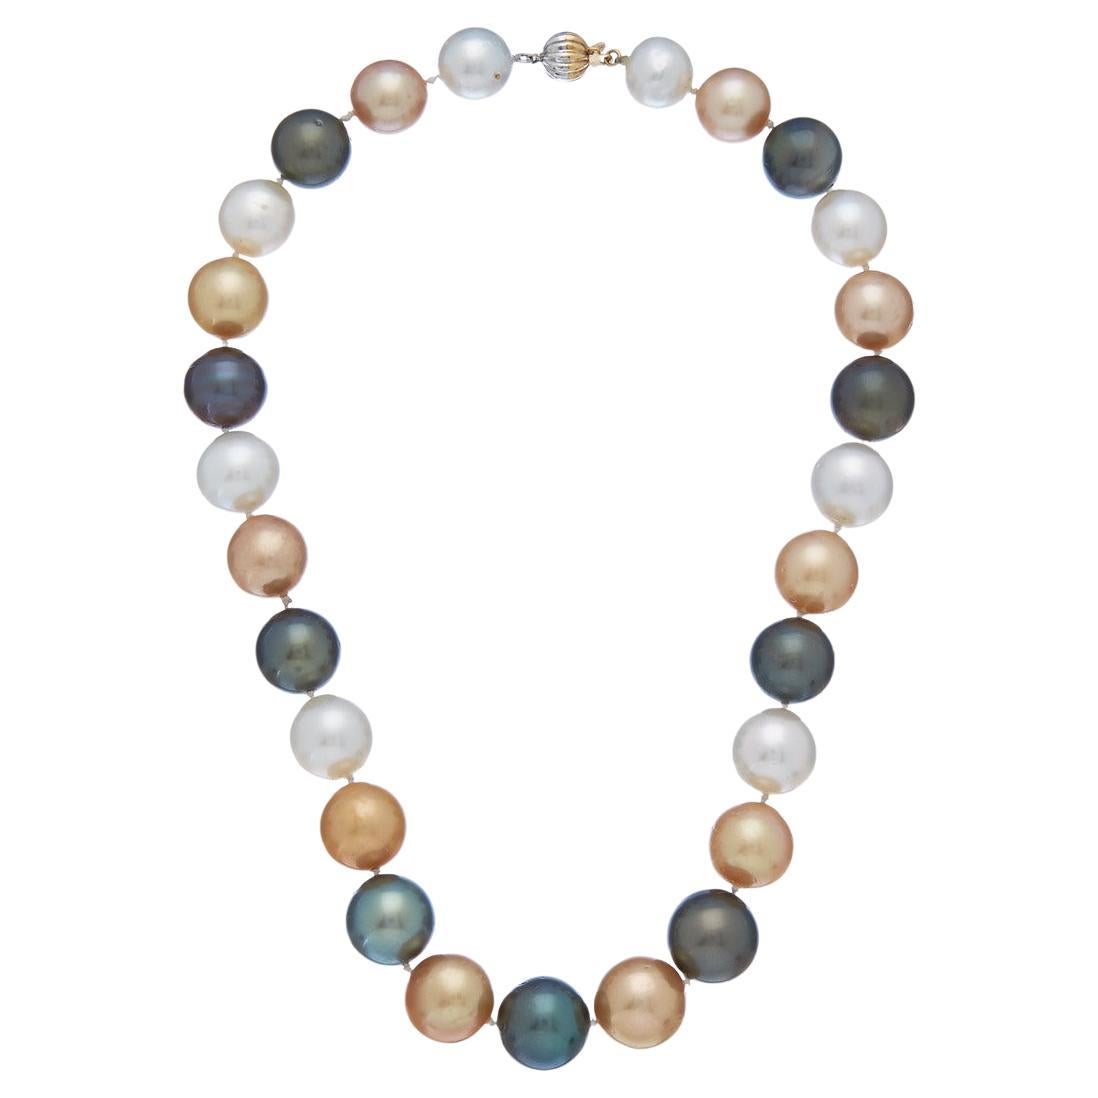 Diana M. 14 kt white gold pearl necklace adorned with 9-14 mm white and yellow 